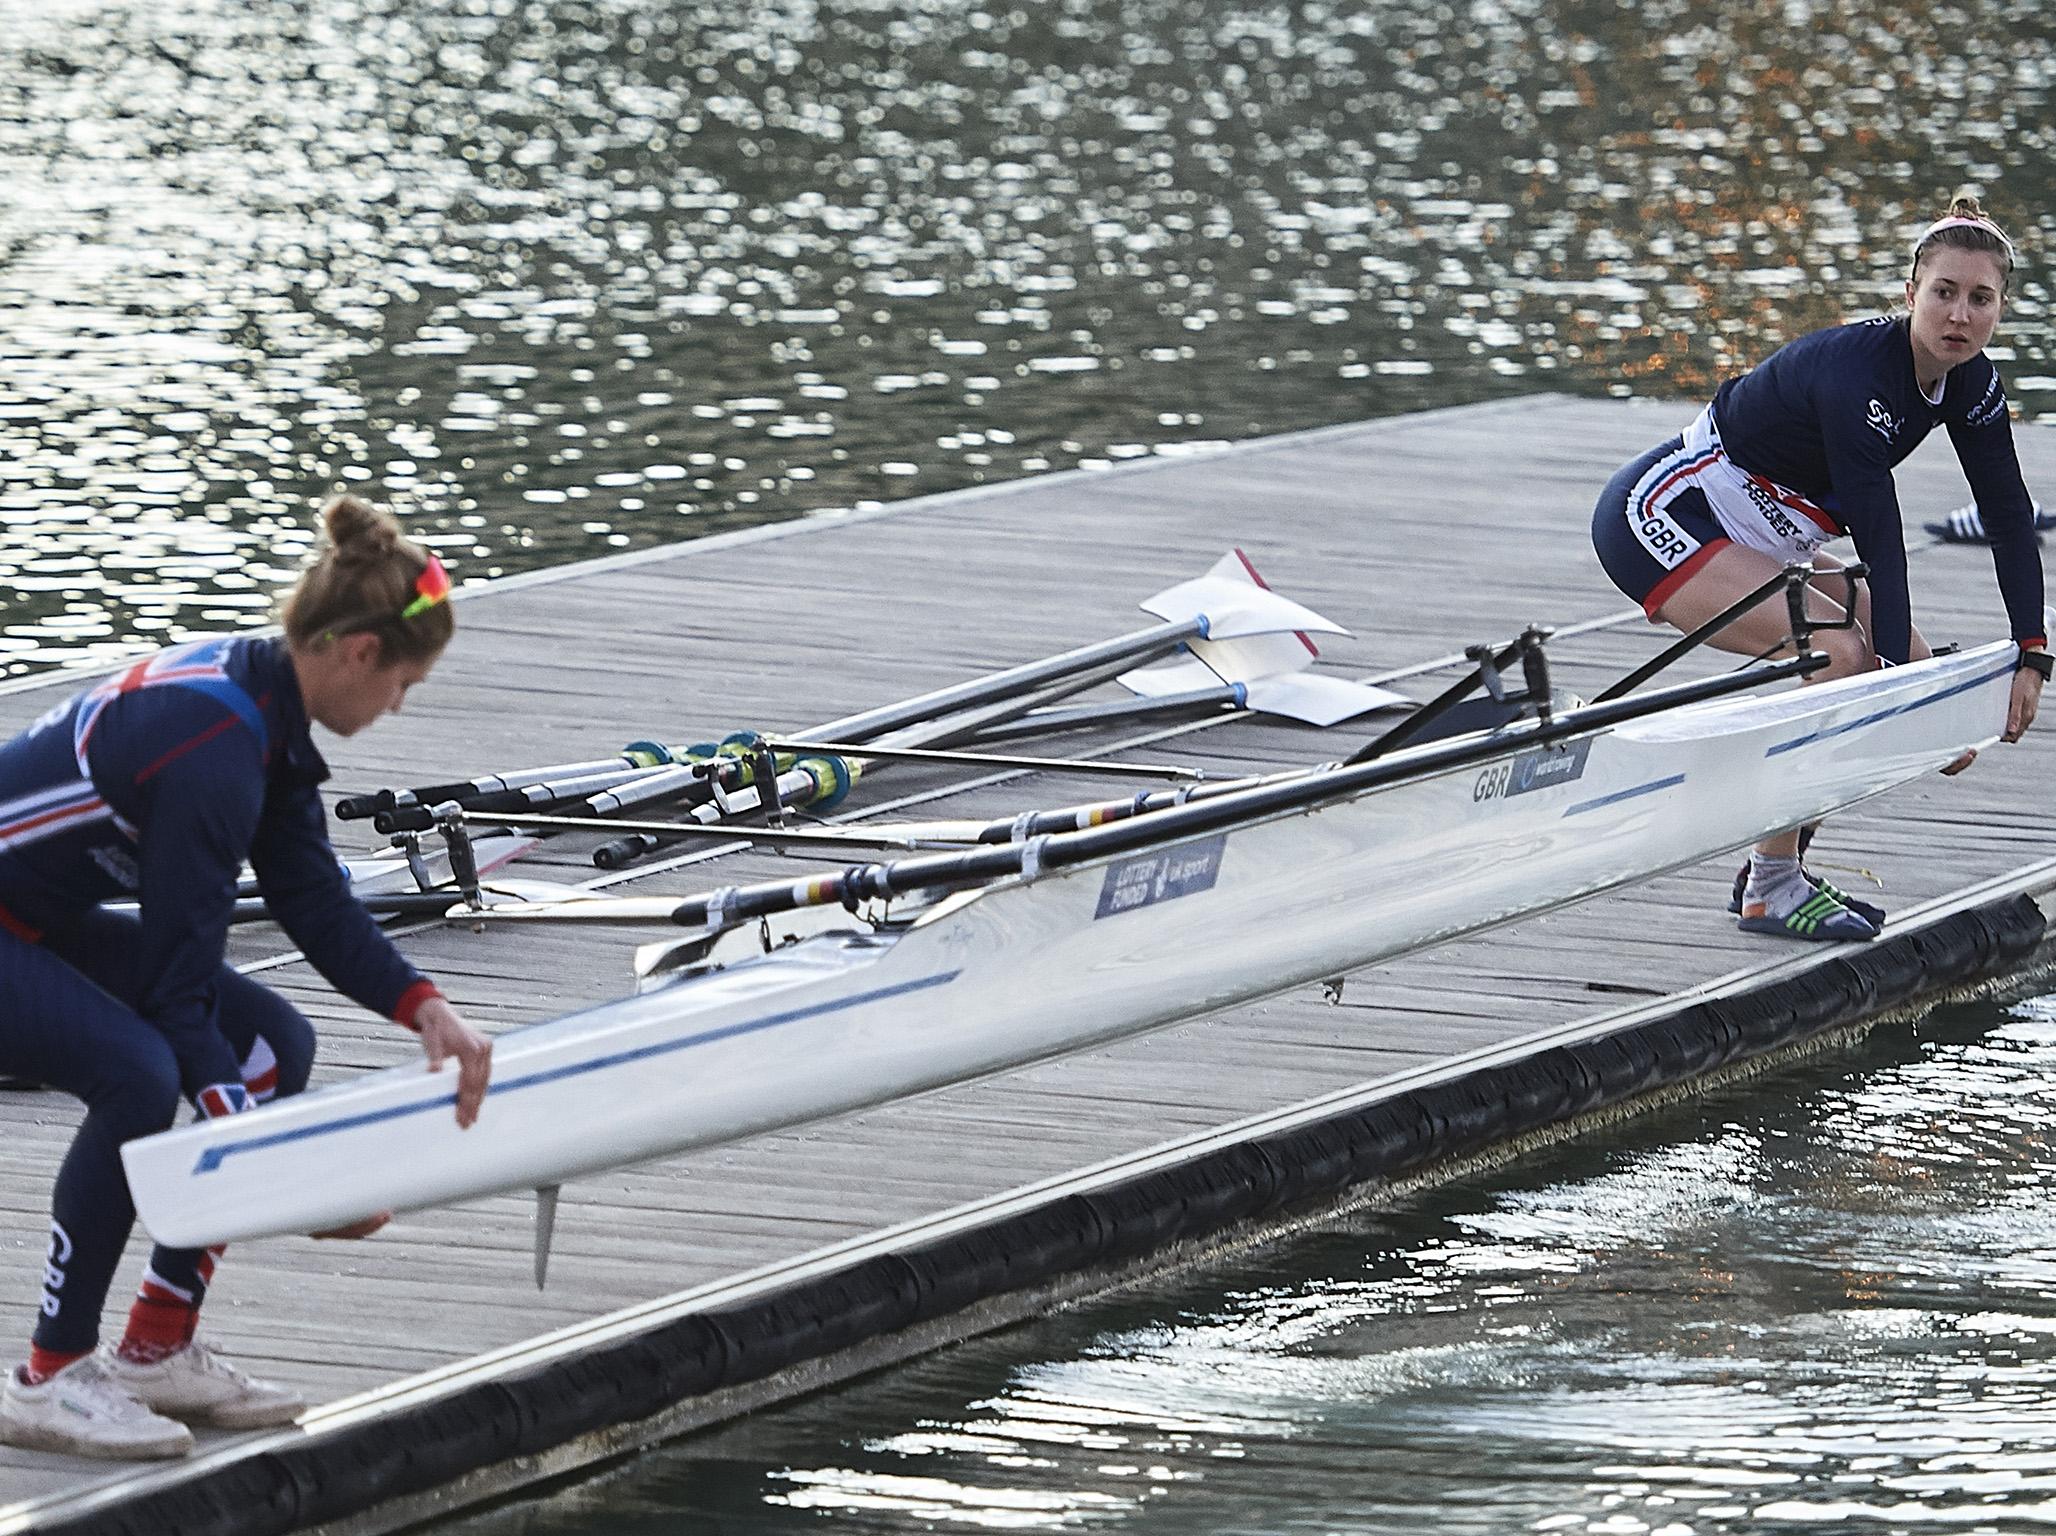 Training is relentless for elite rowers